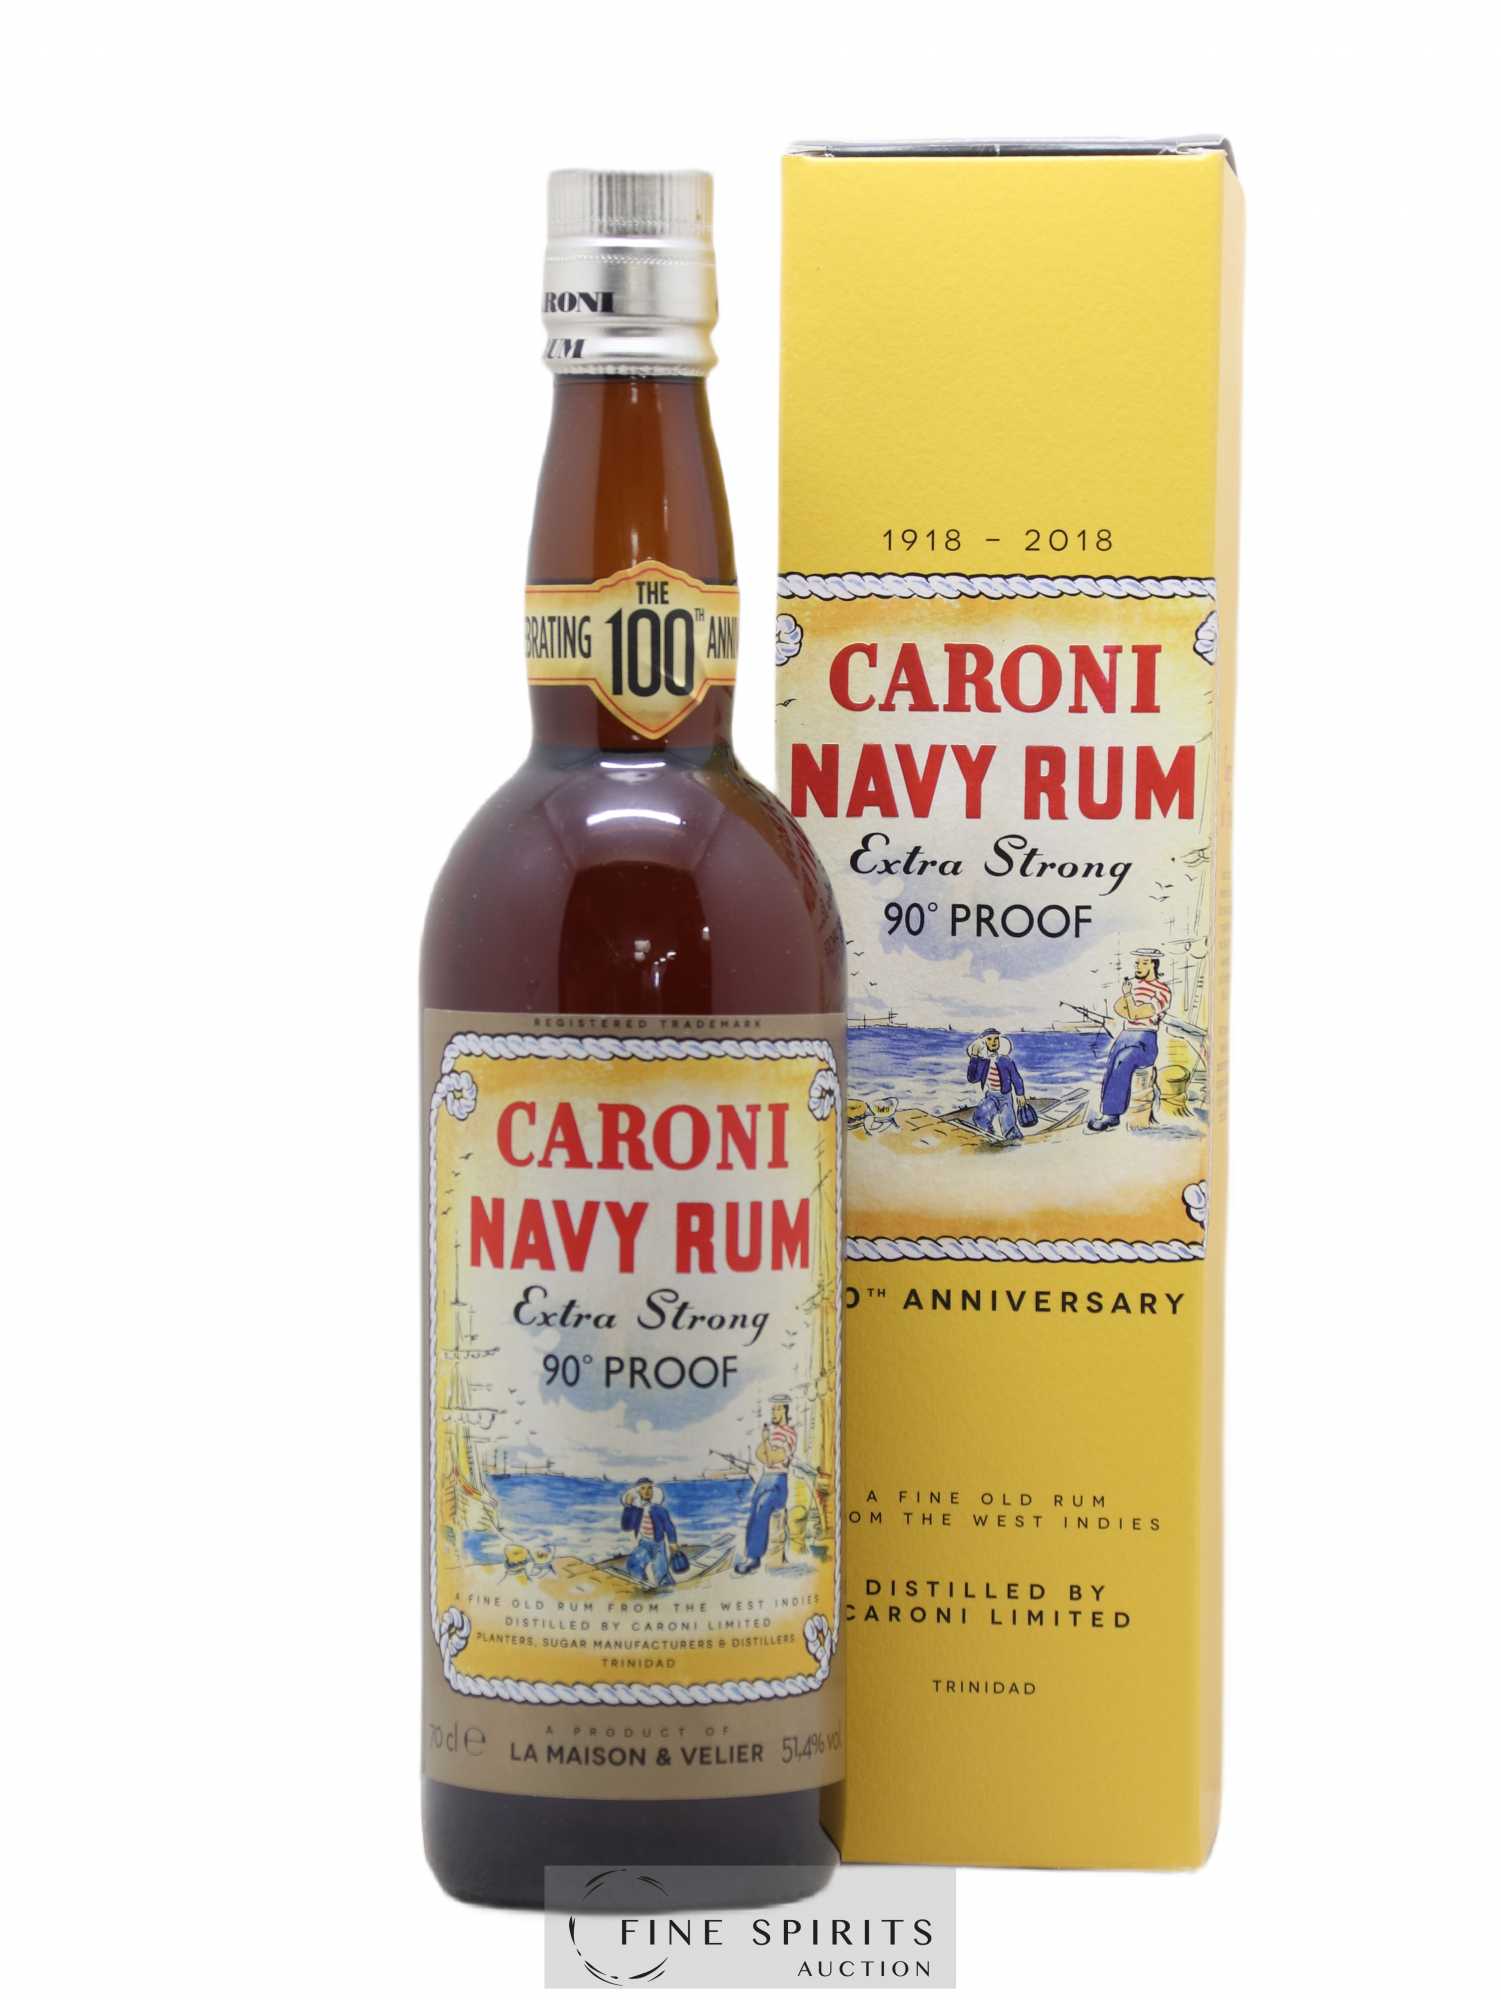 Caroni 18 years Velier Navy Rum 90° Proof - bottled 2018 Celebrating the 100th Anniversary Extra Strong 